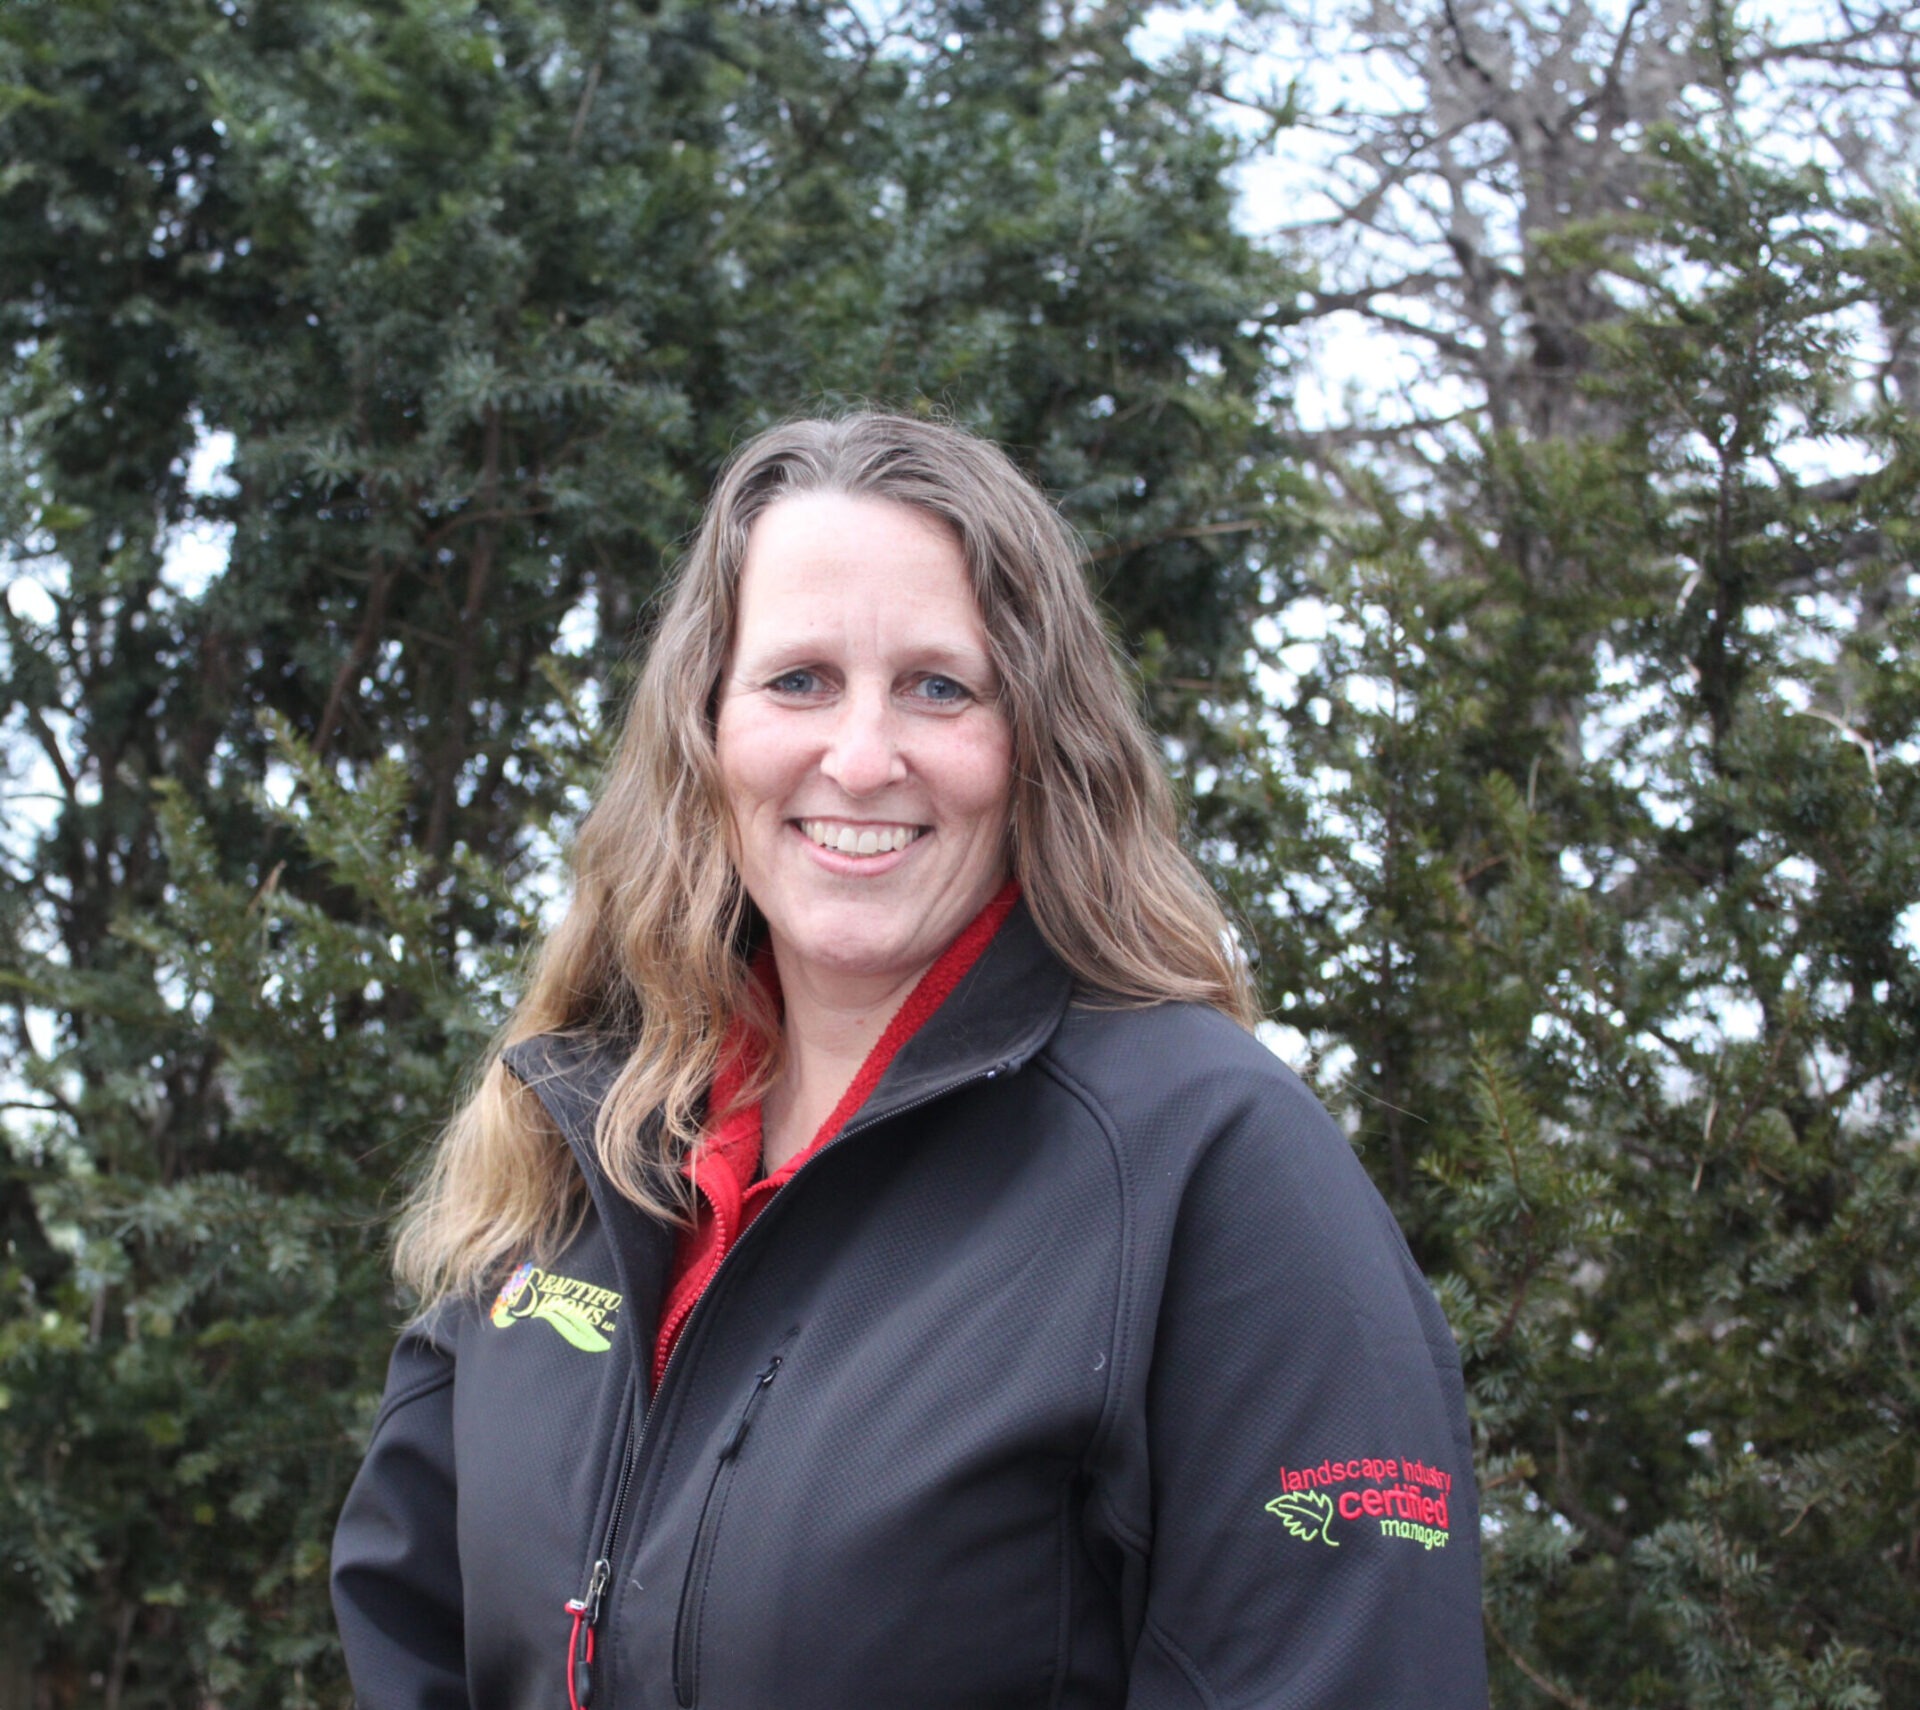 A smiling person with long hair stands in front of evergreen trees, wearing a black jacket with red detailing and an embroidered logo.